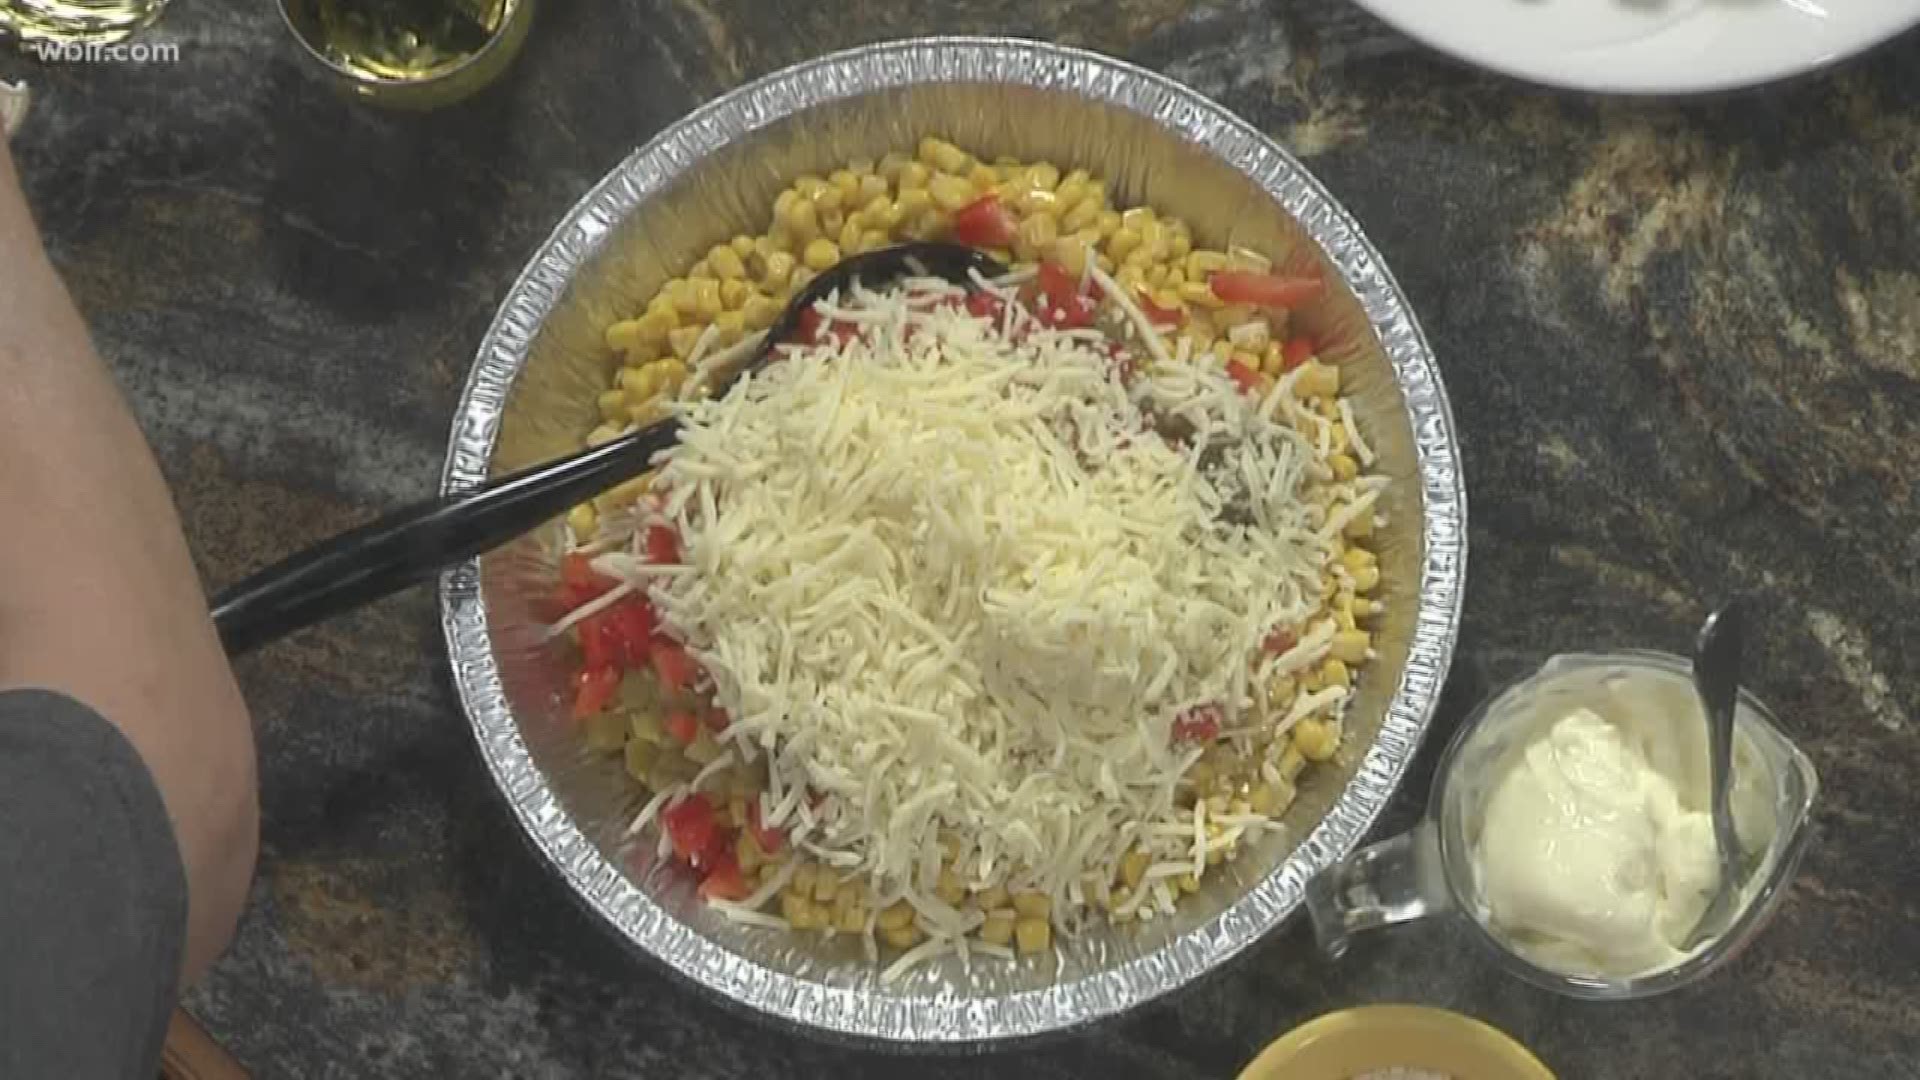 Connie with C and R Catering & Cakes shares a corn dip recipe that might also be a good side dish. To learn more about CR Catering and Cakes visit their Facebook page or call (865) 456-0127. July 2, 2019-4pm.